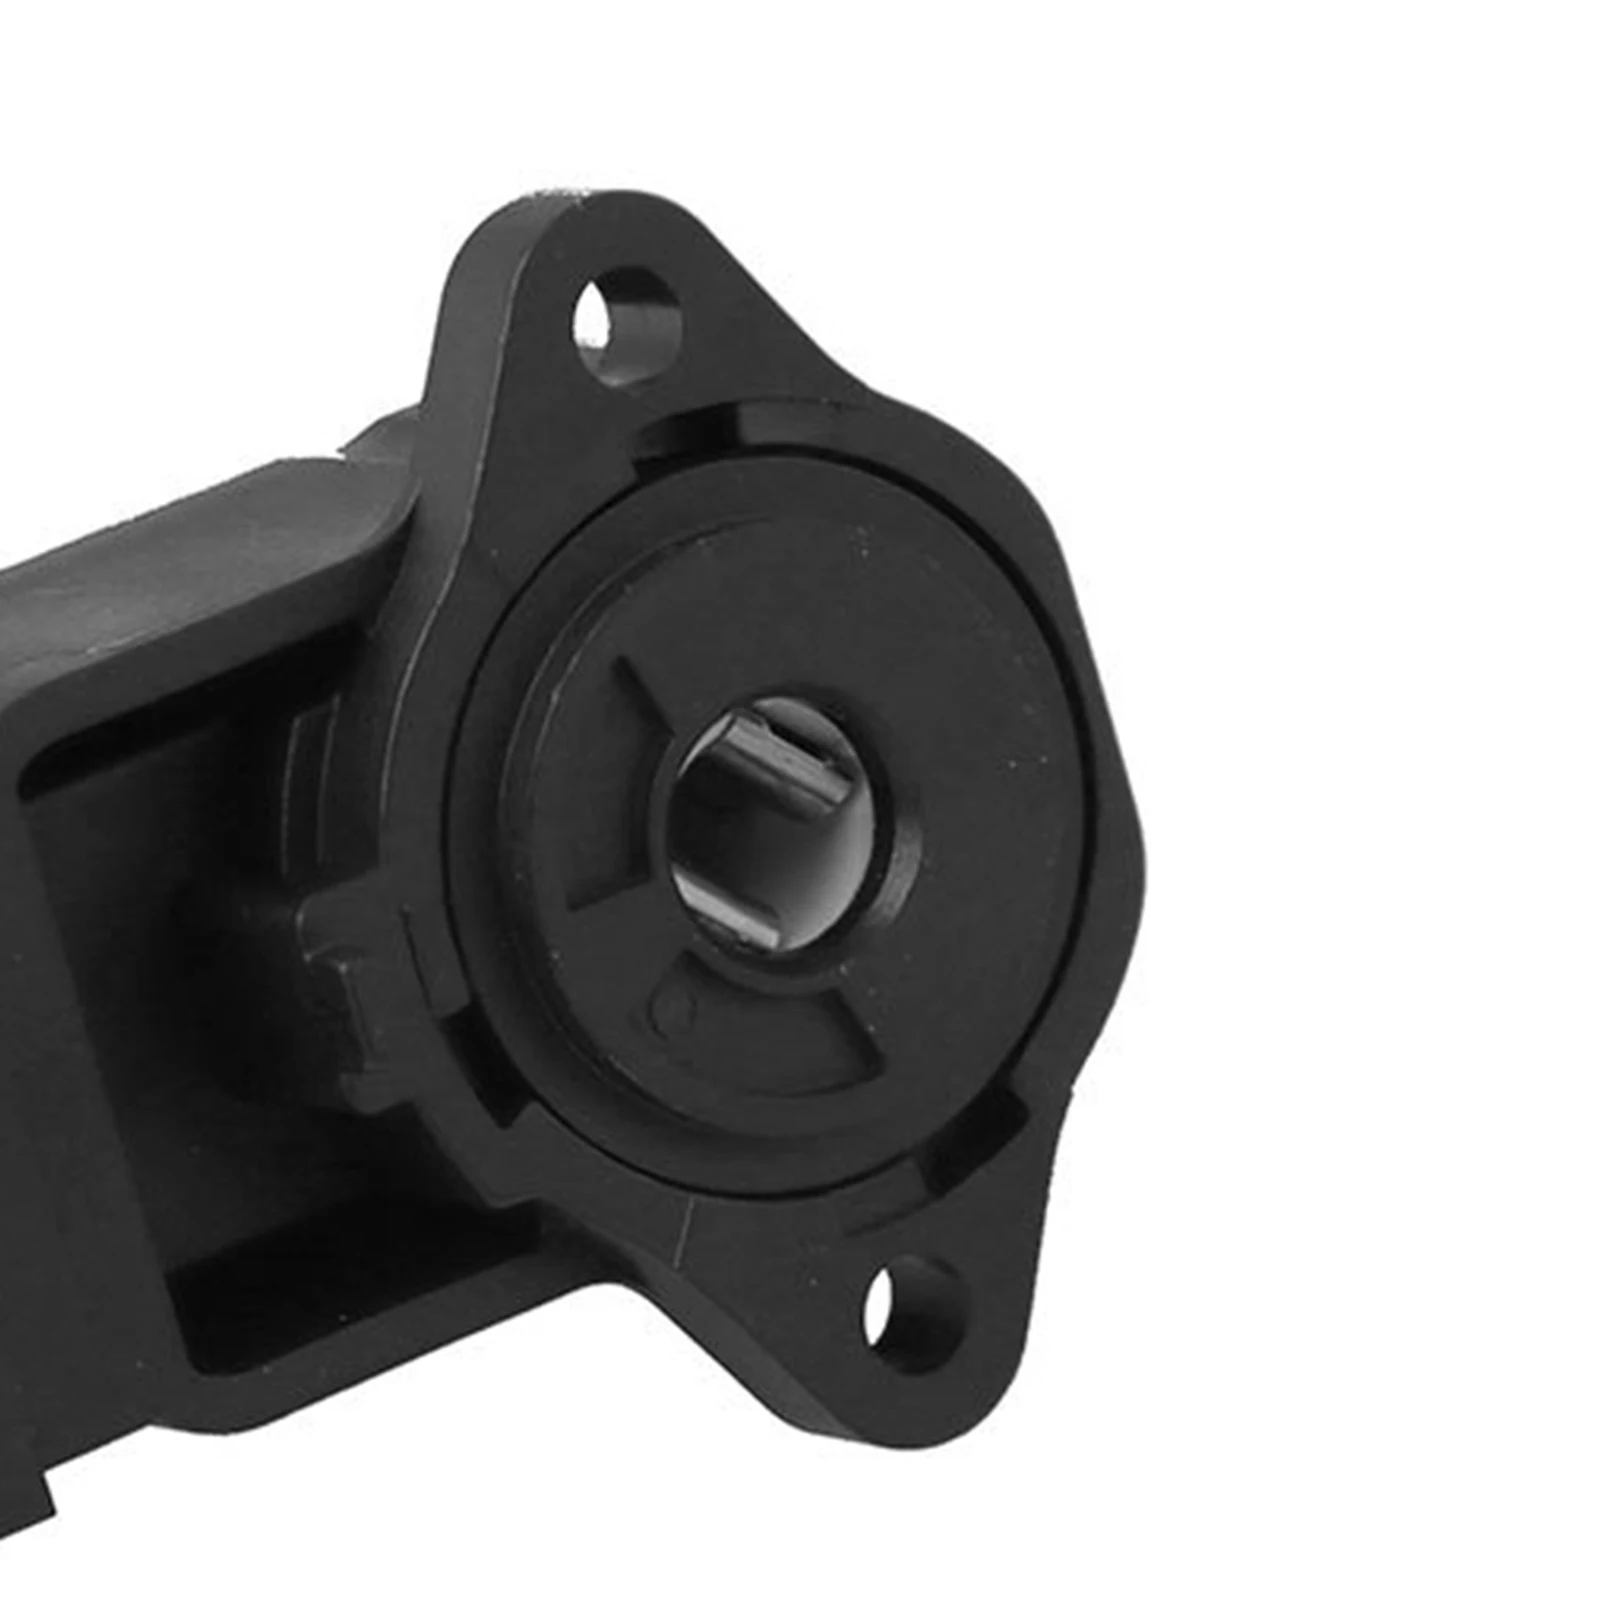 Throttle Position Sensor DY1164 DY1116 for Ford F-150 F-250 E-250 E-350, Professional Accessories